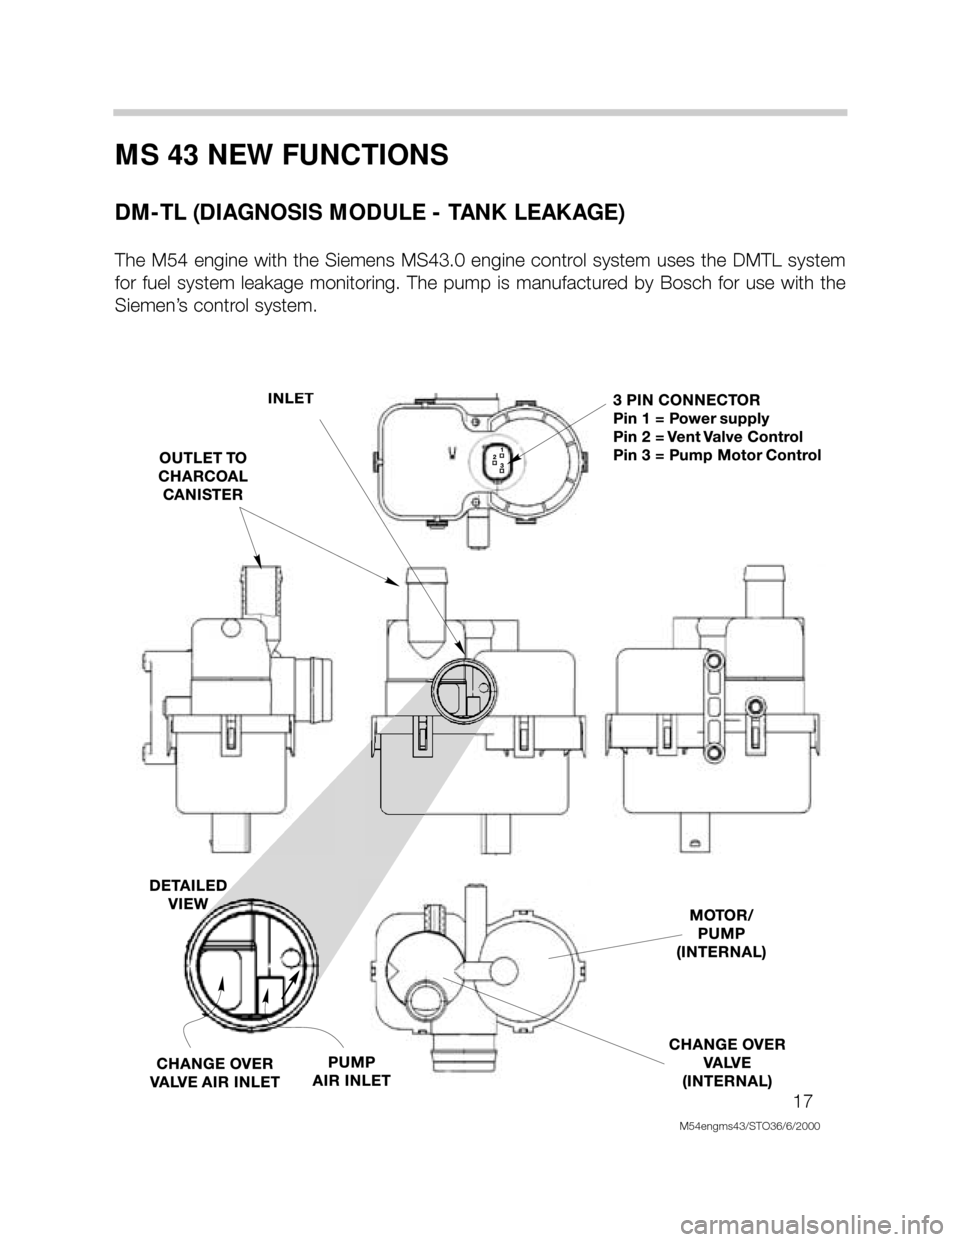 BMW X5 2002 E53 M54 Engine User Guide 17
M54engms43/STO36/6/2000
MS 43 NEW FUNCTIONS
DM-TL (DIAGNOSIS MODULE - TANK LEAKAGE)
The  M54  engine  with  the  Siemens  MS43.0  engine  control  system  uses  the  DMTL  system
for  fuel  system 